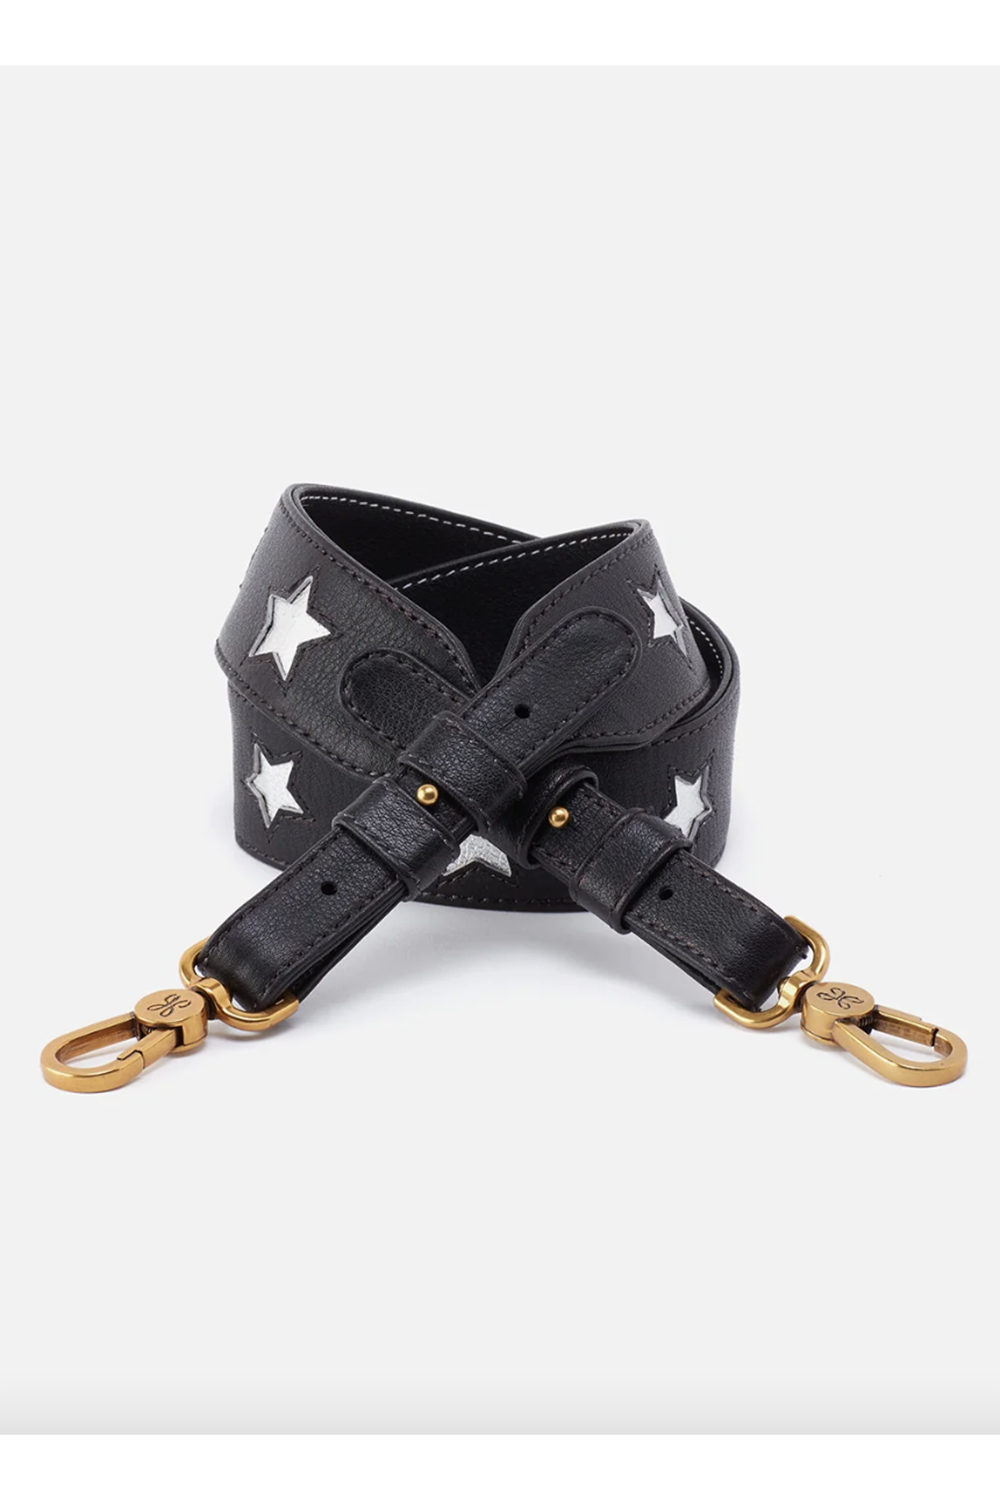 Leather Strap - Star